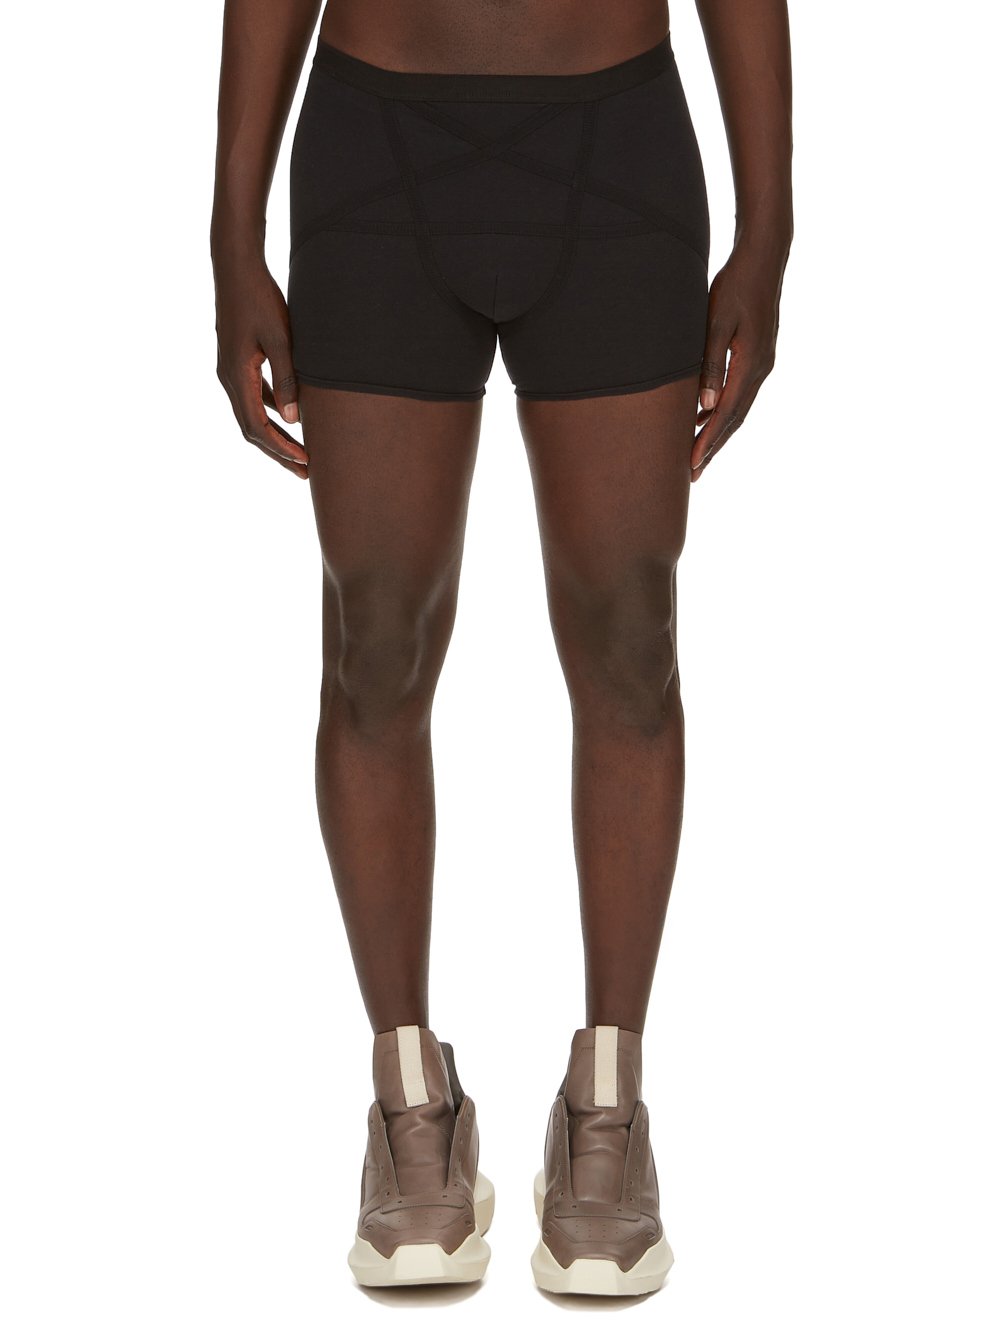 RICK OWENS FW23 LUXOR PENTABRIEF BOXER IN  BLACK SEACELL RIB JERSEY 